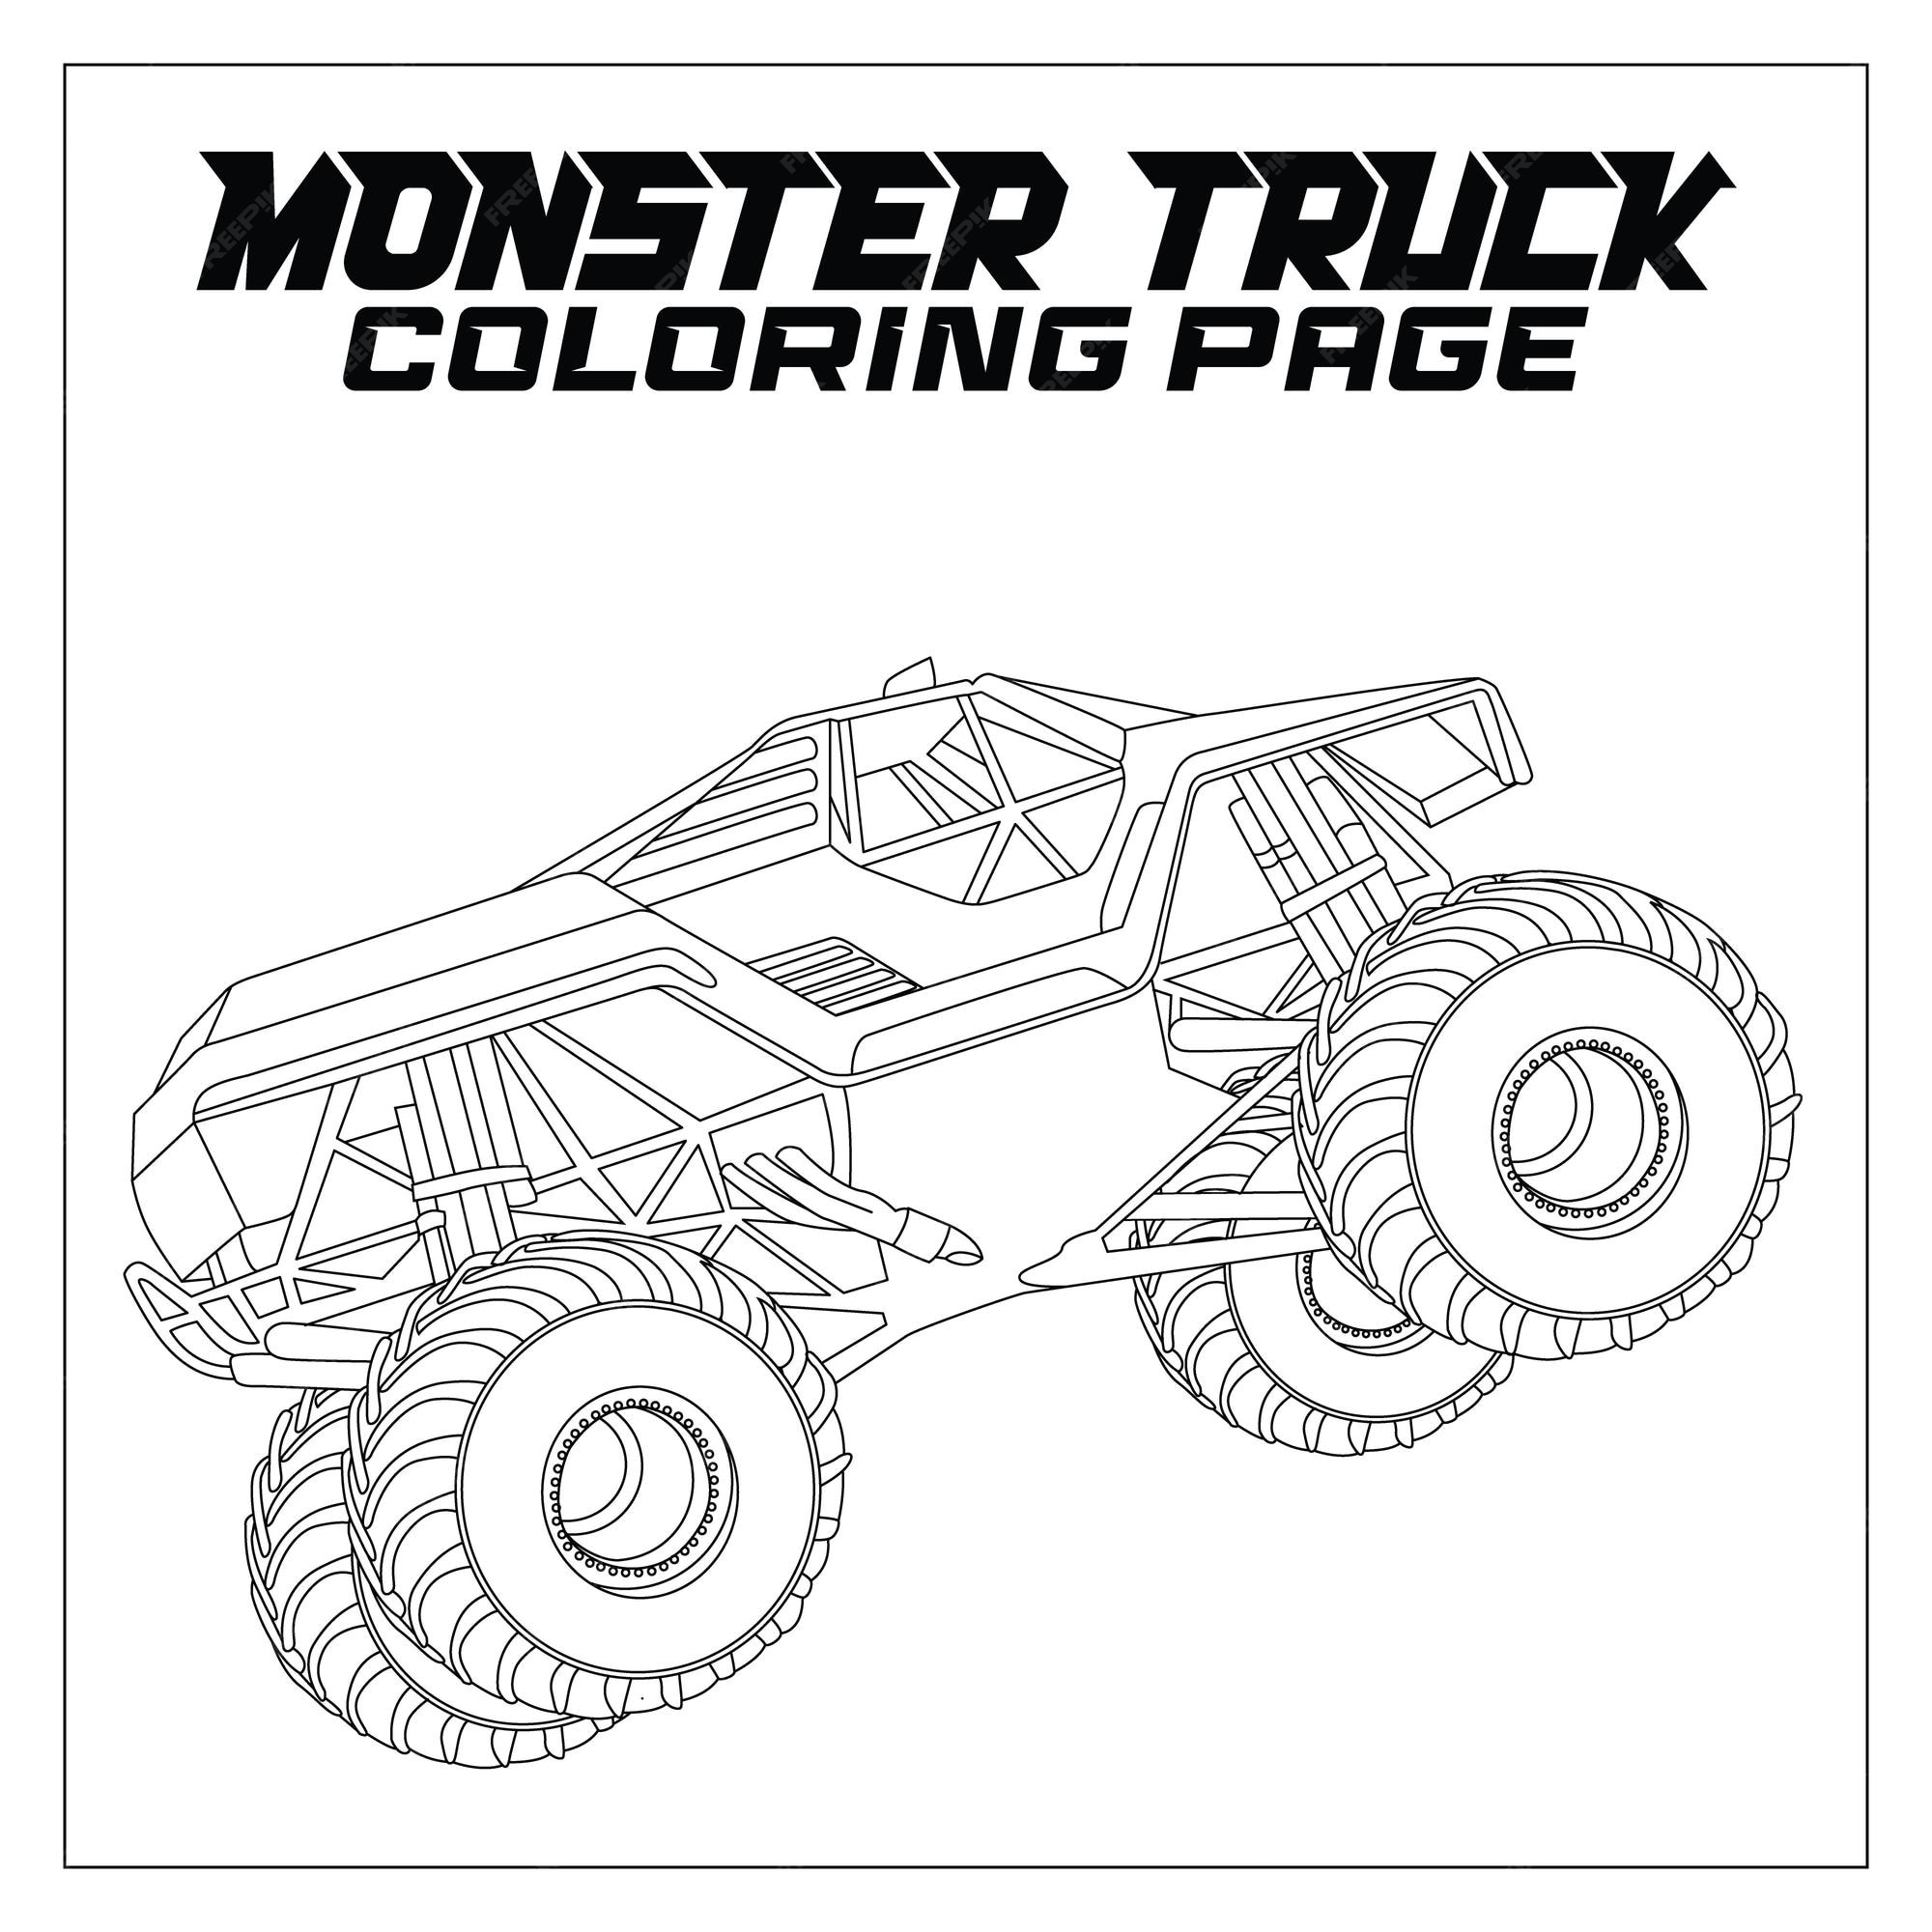 Premium vector a monster truck coloring page with the words monster truck coloring page